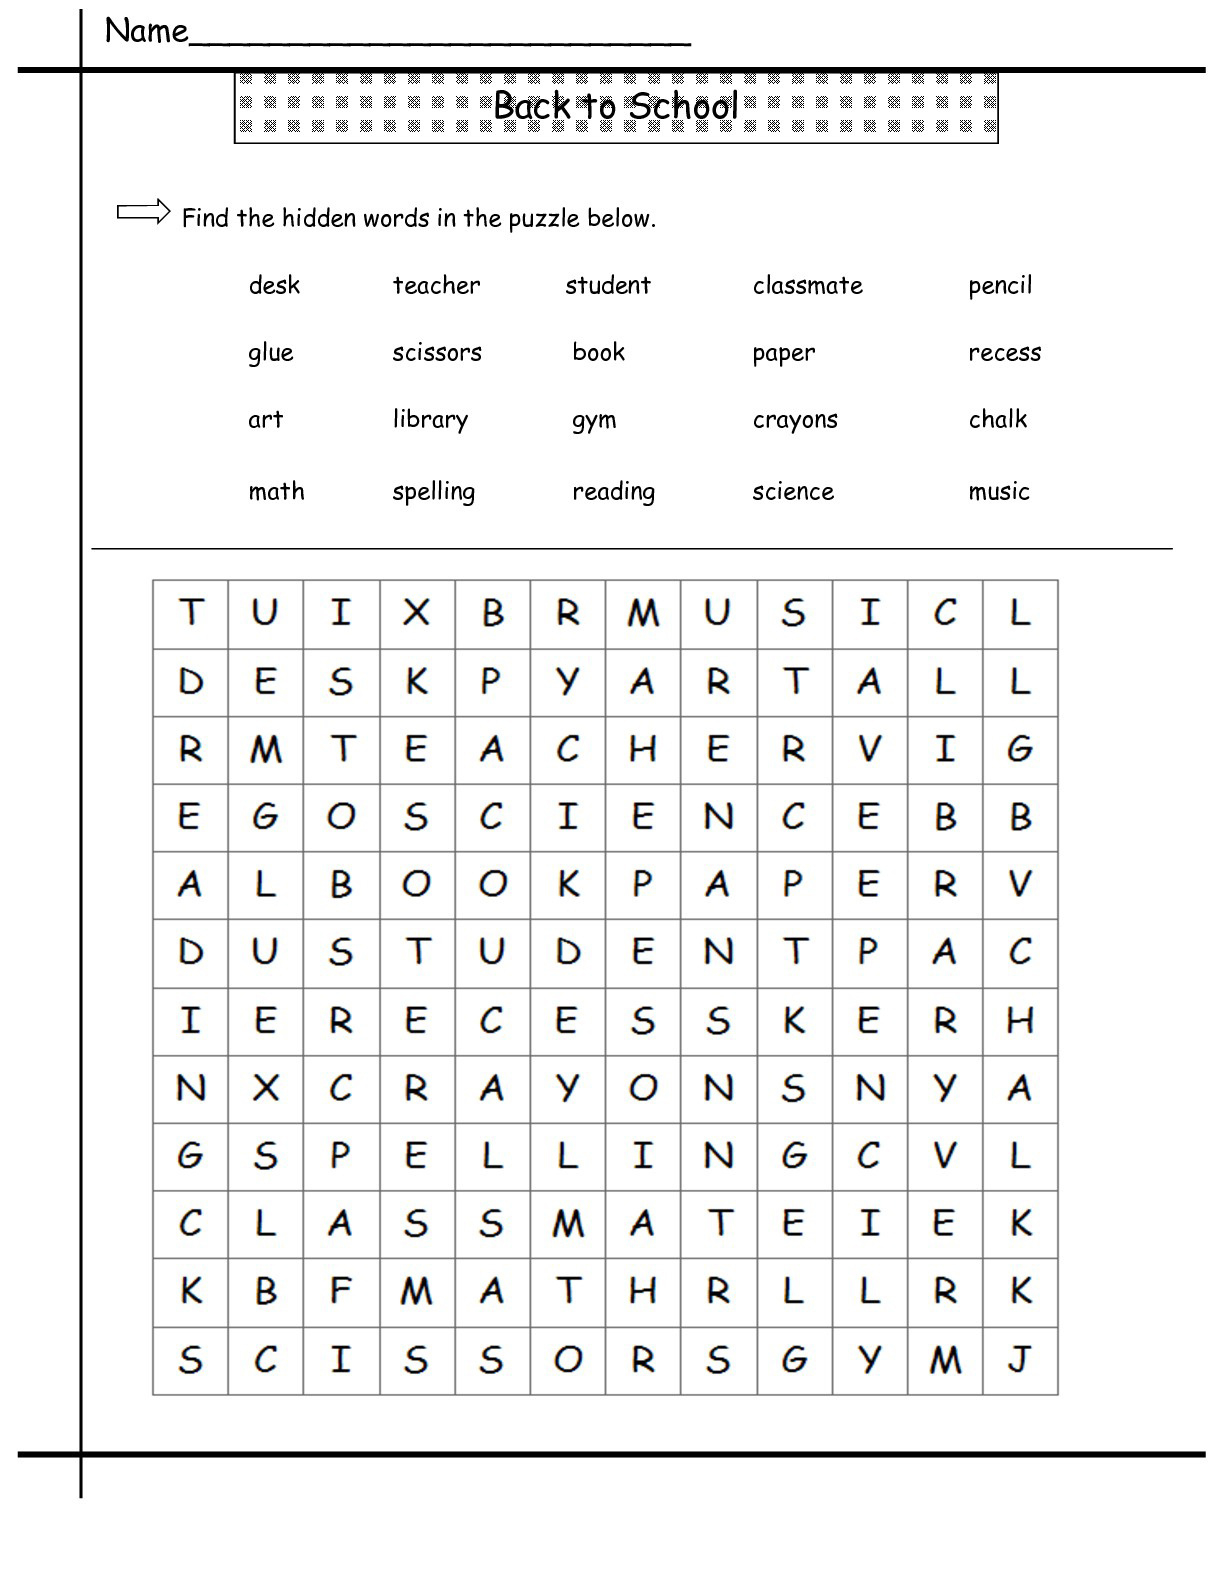 2Nd Grade Word Search - Best Coloring Pages For Kids intended for 2Nd Grade Word Search Free Printable